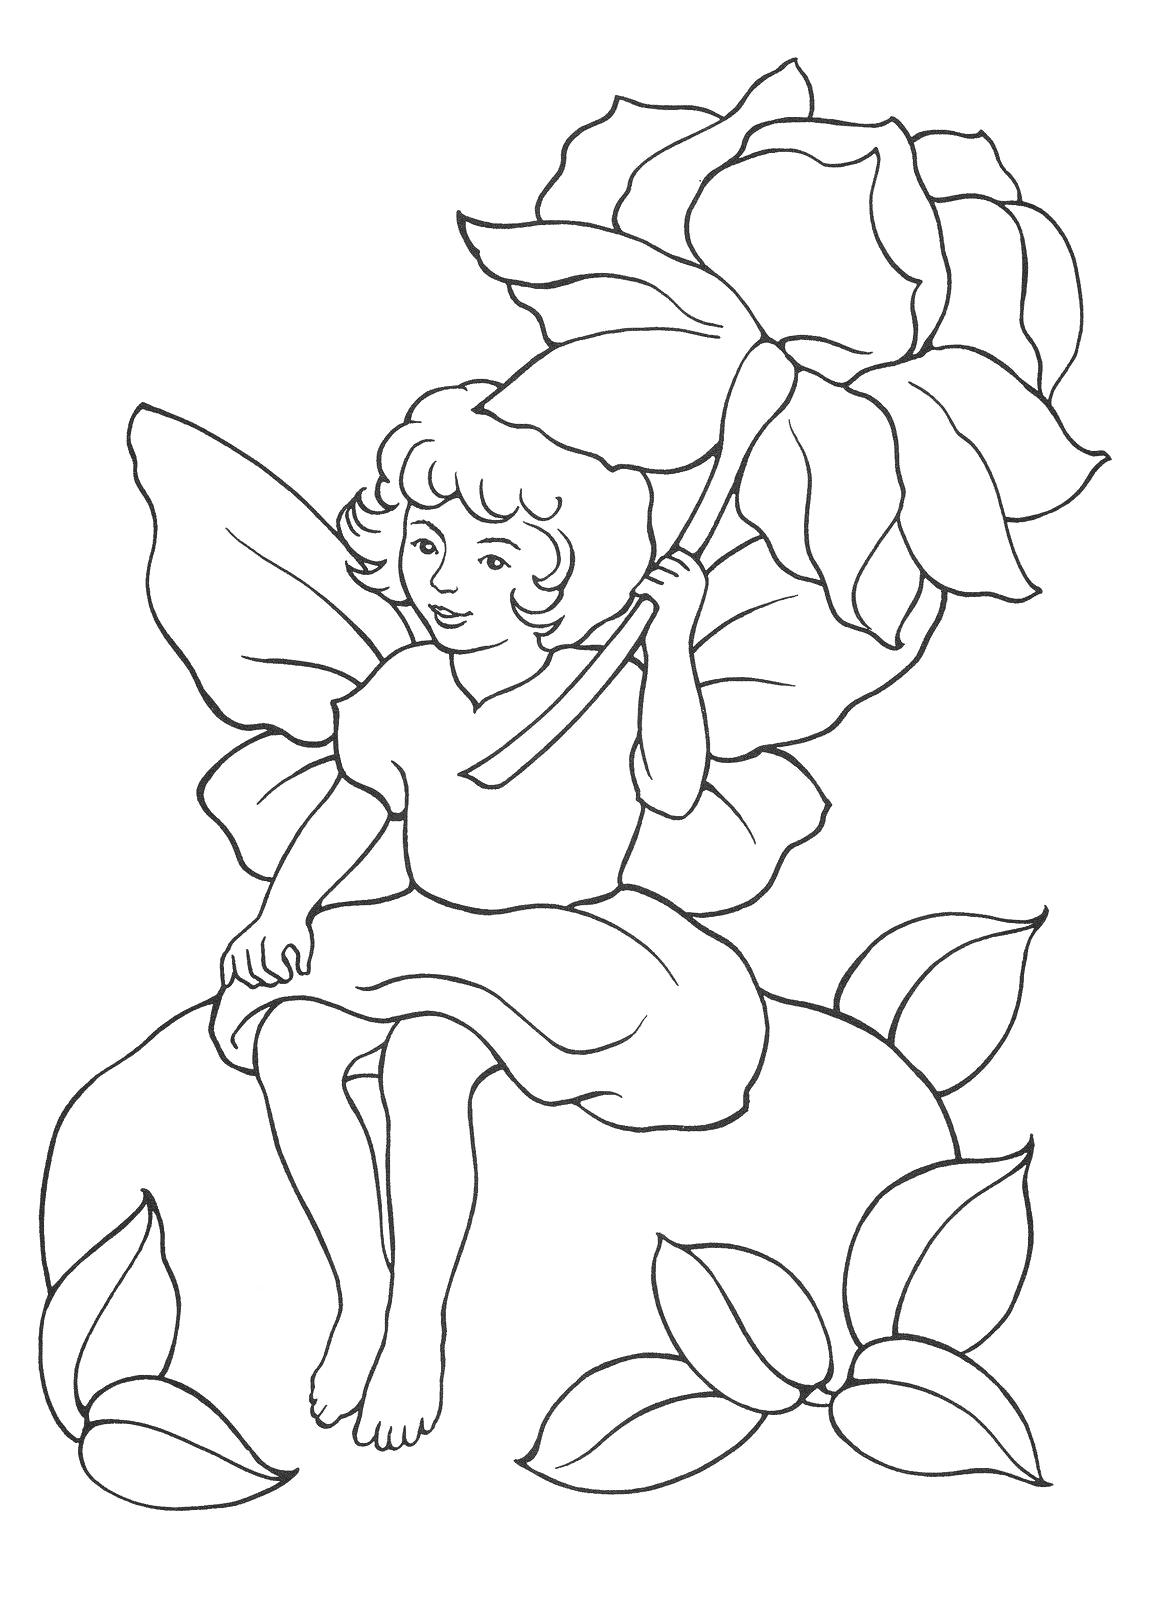 Coloring page - Fairy under the flower